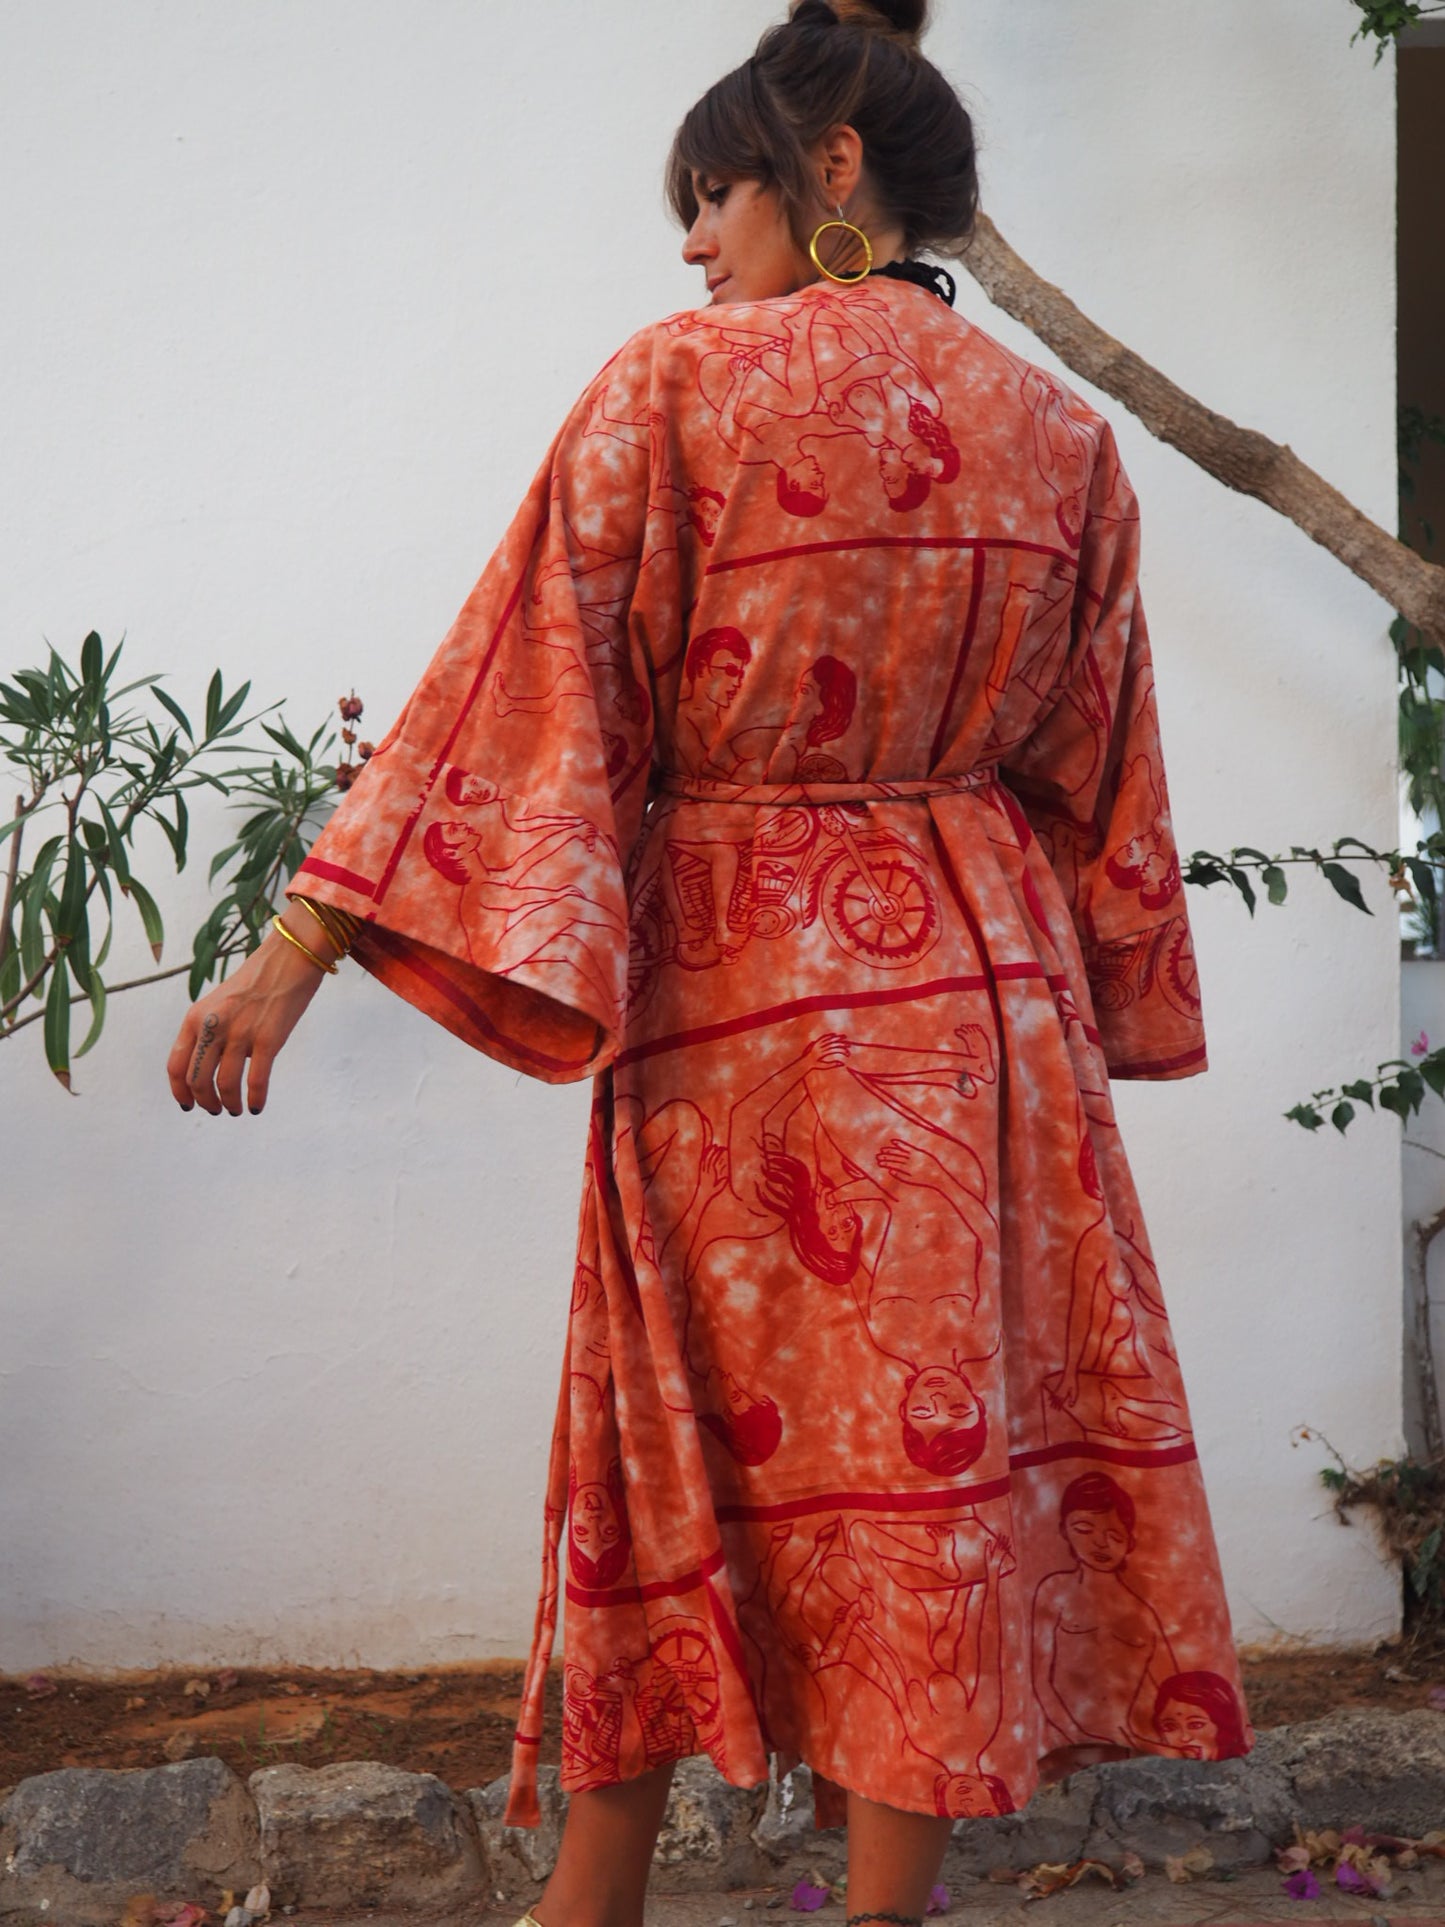 Up-cycled dressing gown with tantric sex position print by Vagabond Ibiza